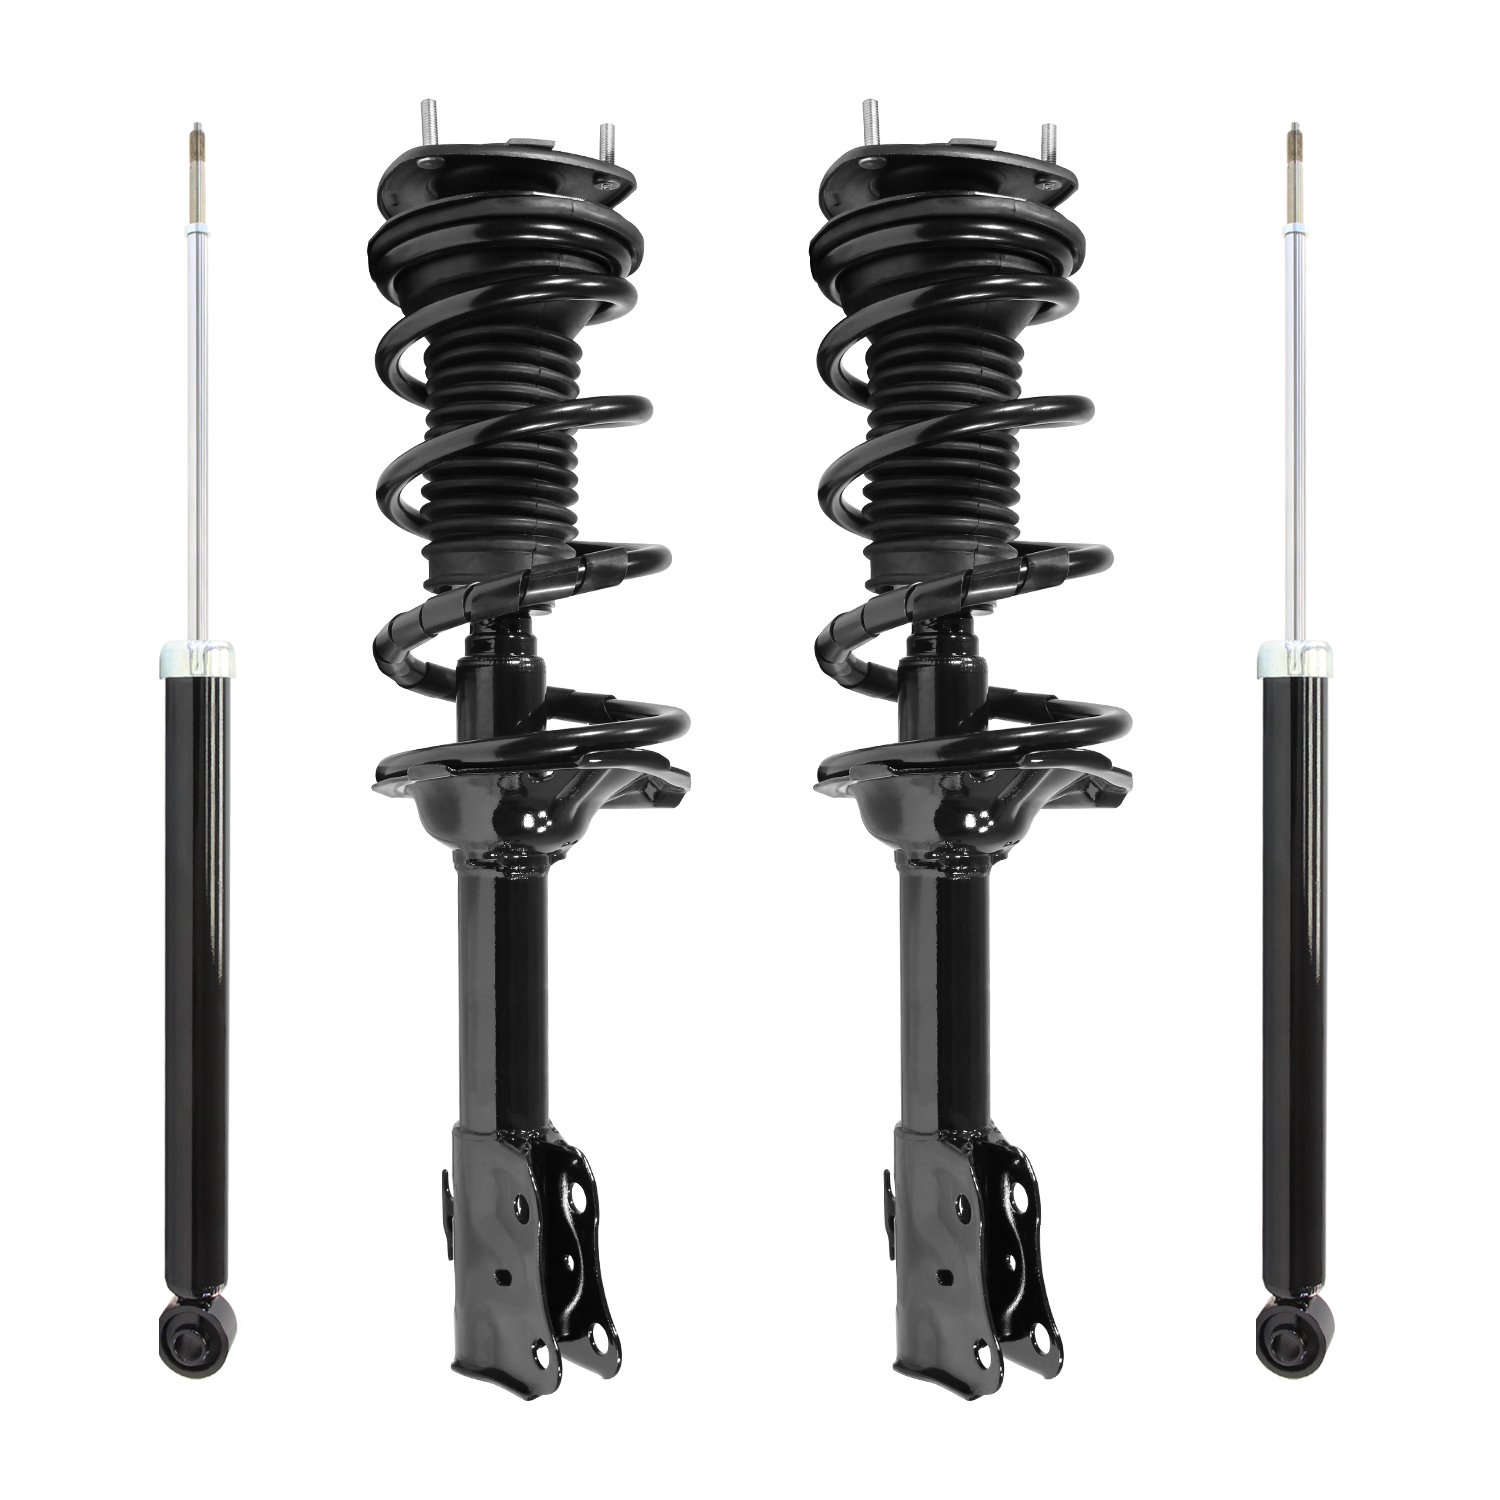 4-11920-259350-001 Front & Rear Suspension Strut & Coil Spring Assembly Fits Select Scion xB